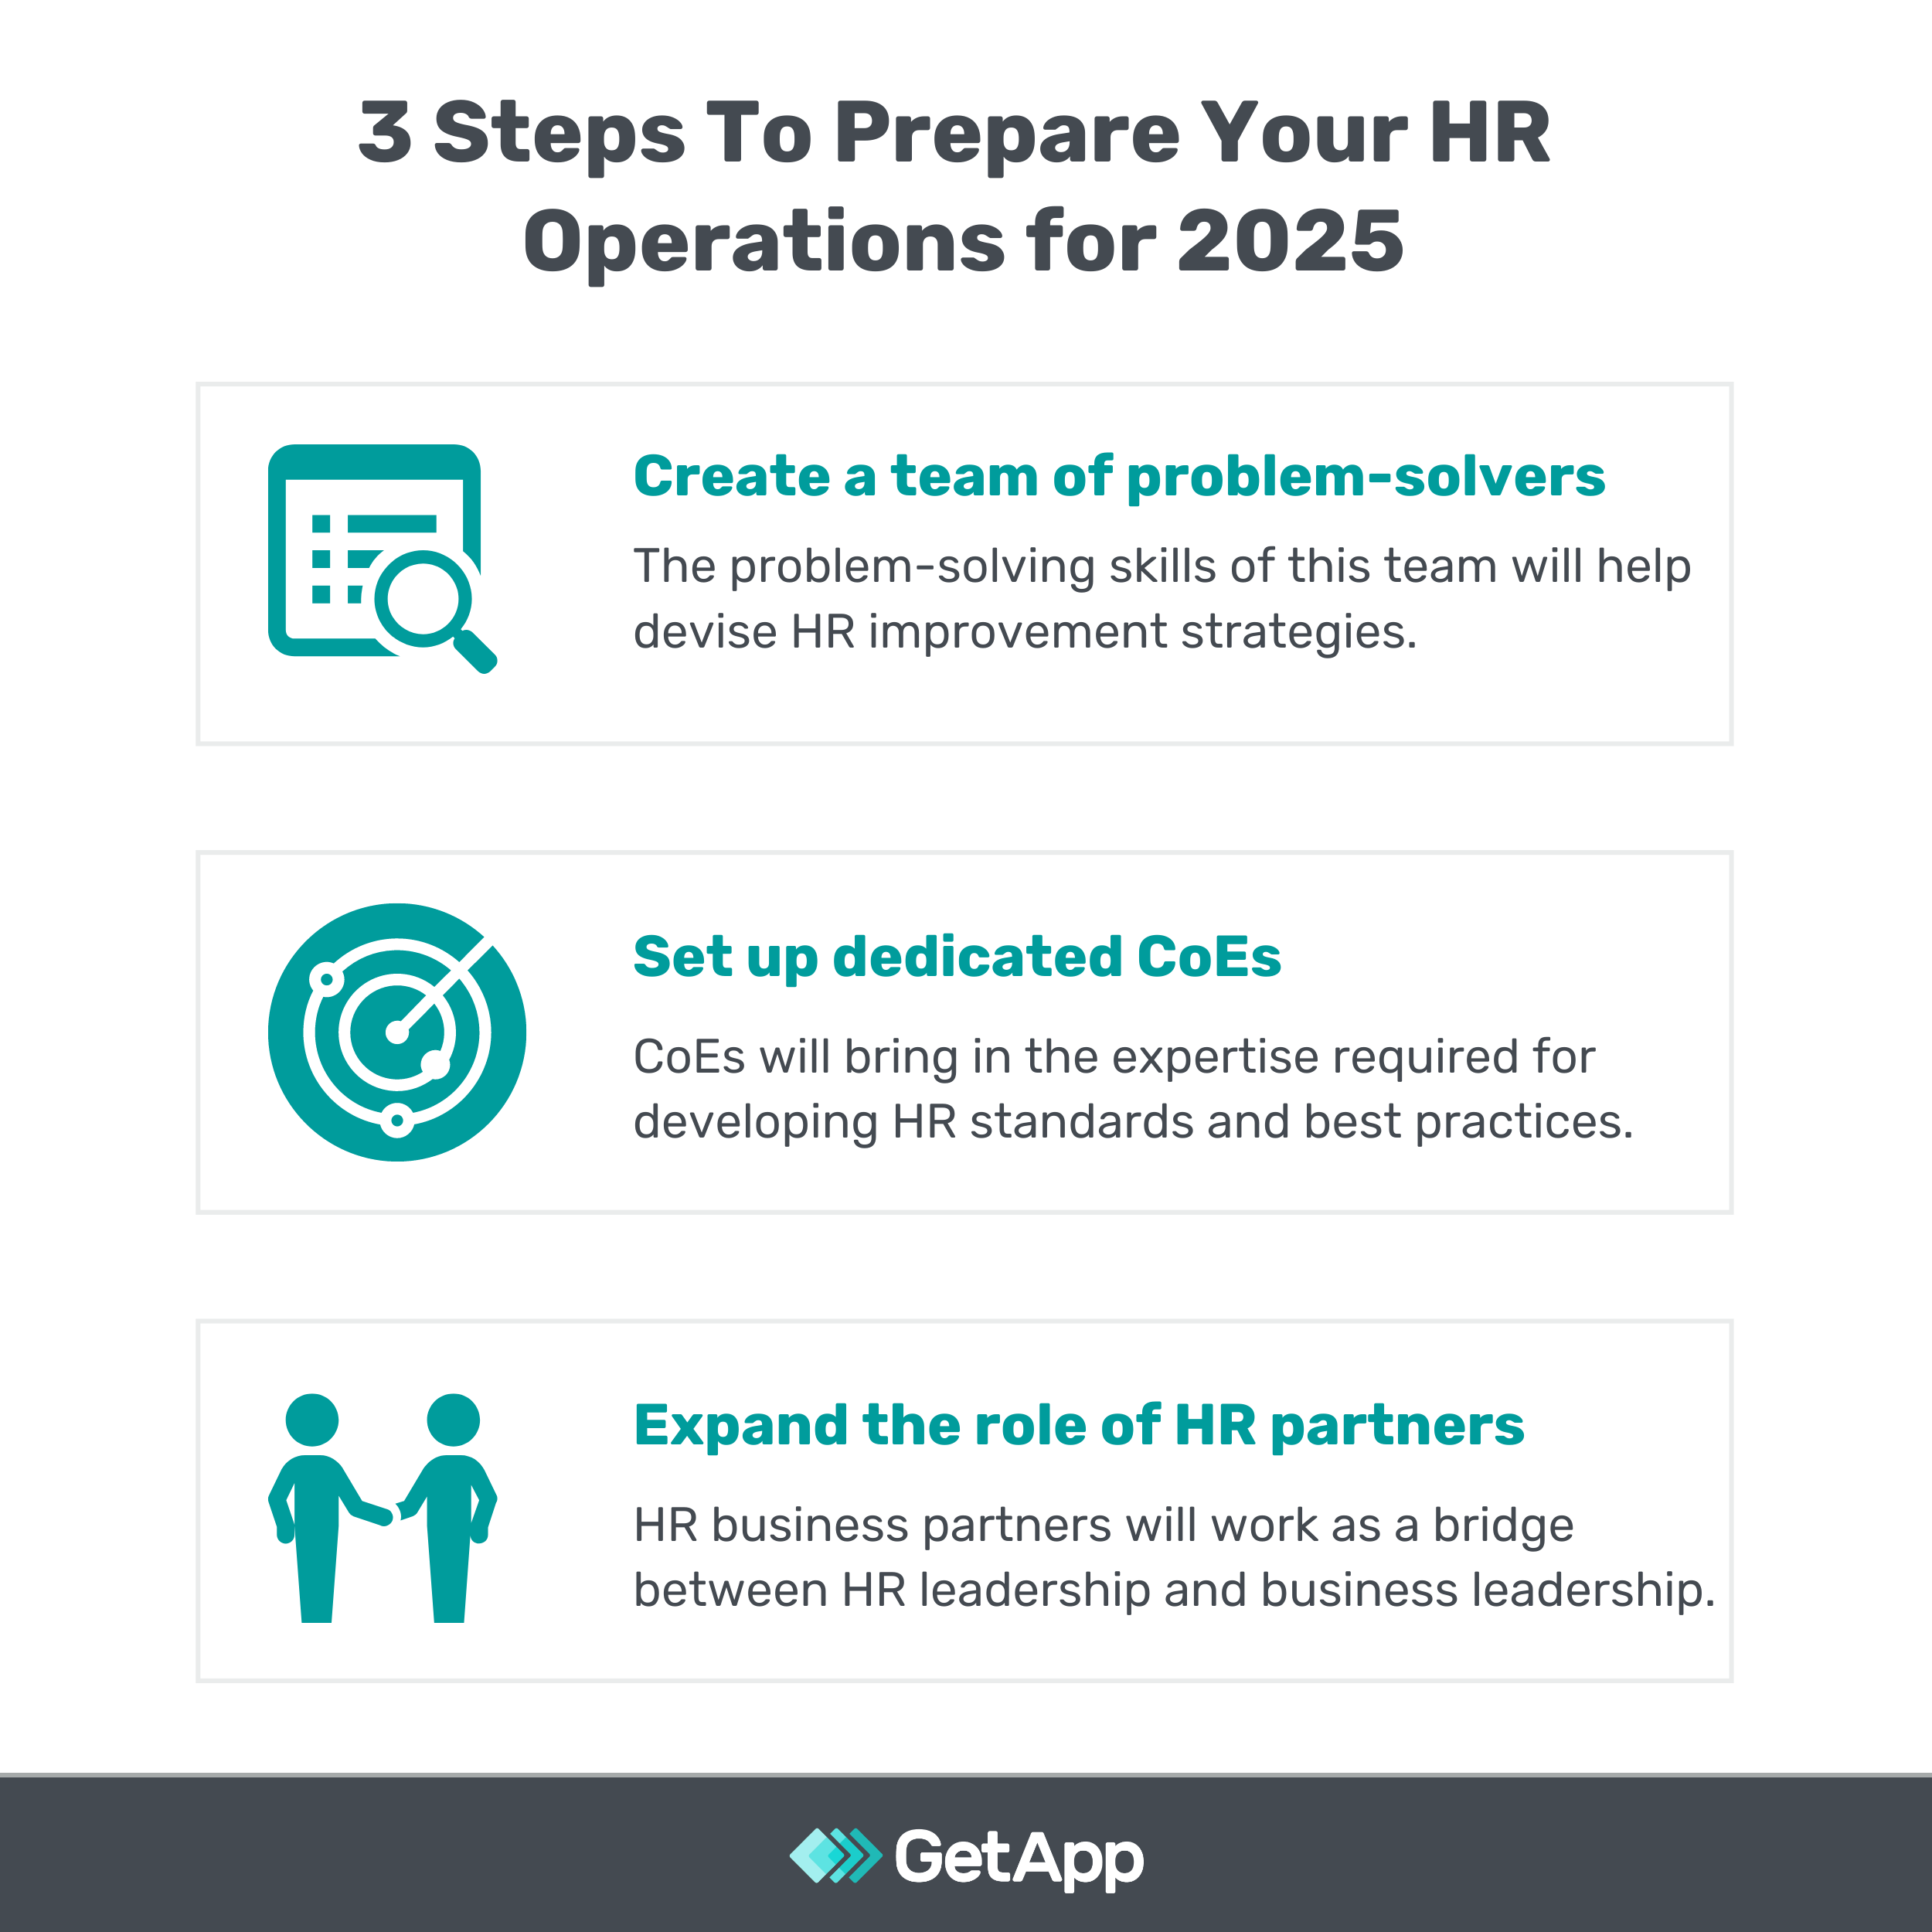 3 Steps To Prepare Your HR Operations For 2025 